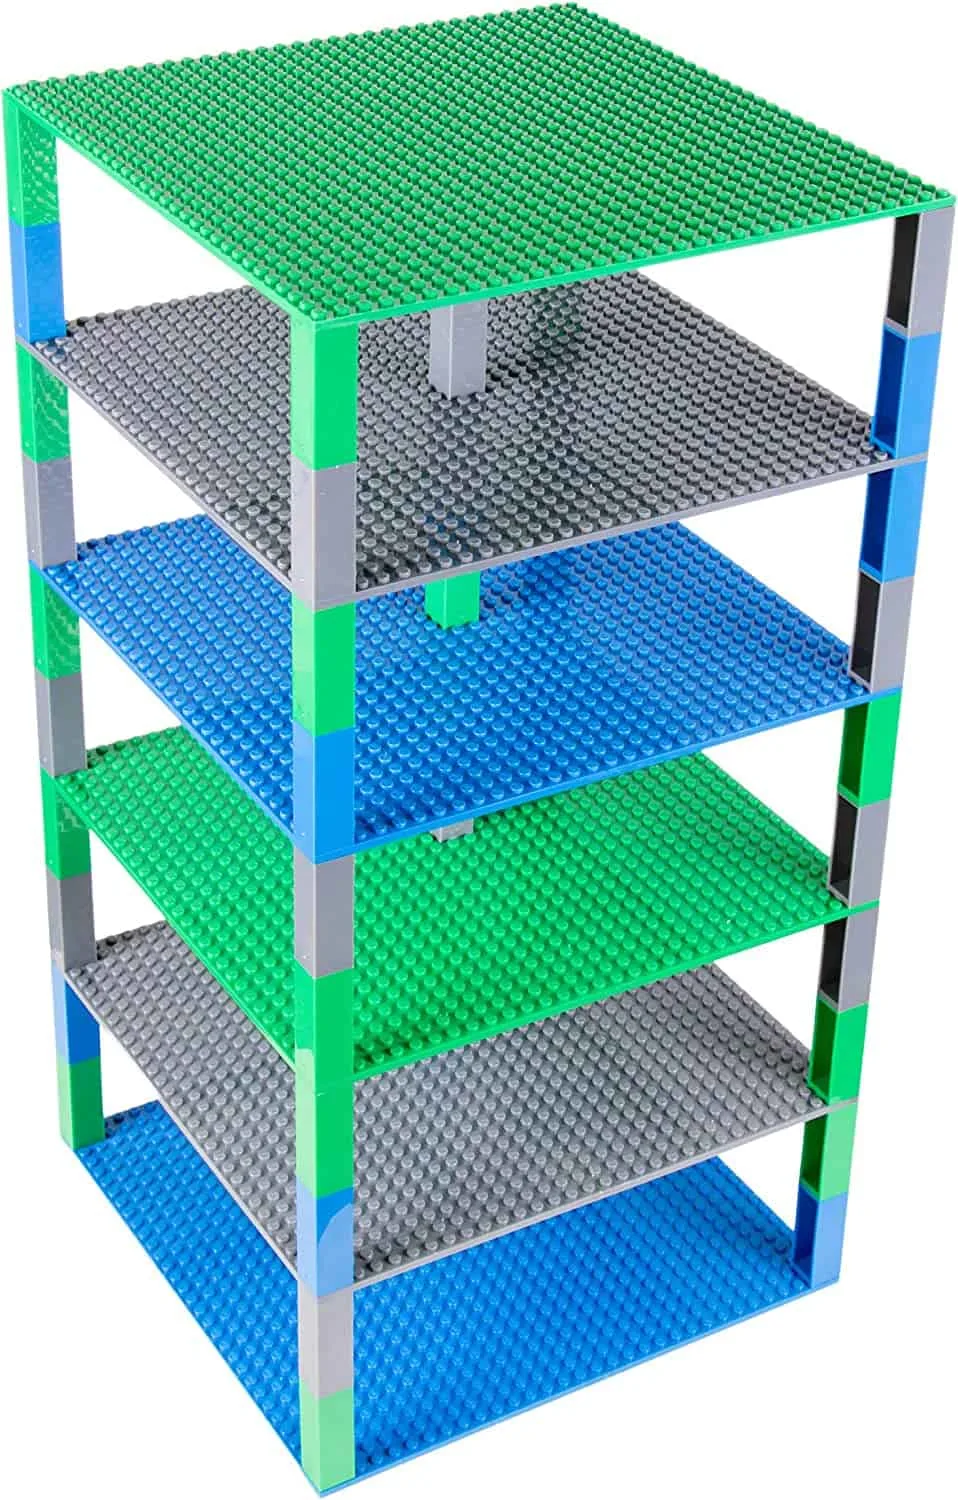 Lego baseplate tower with alternating green, gray and blue layers